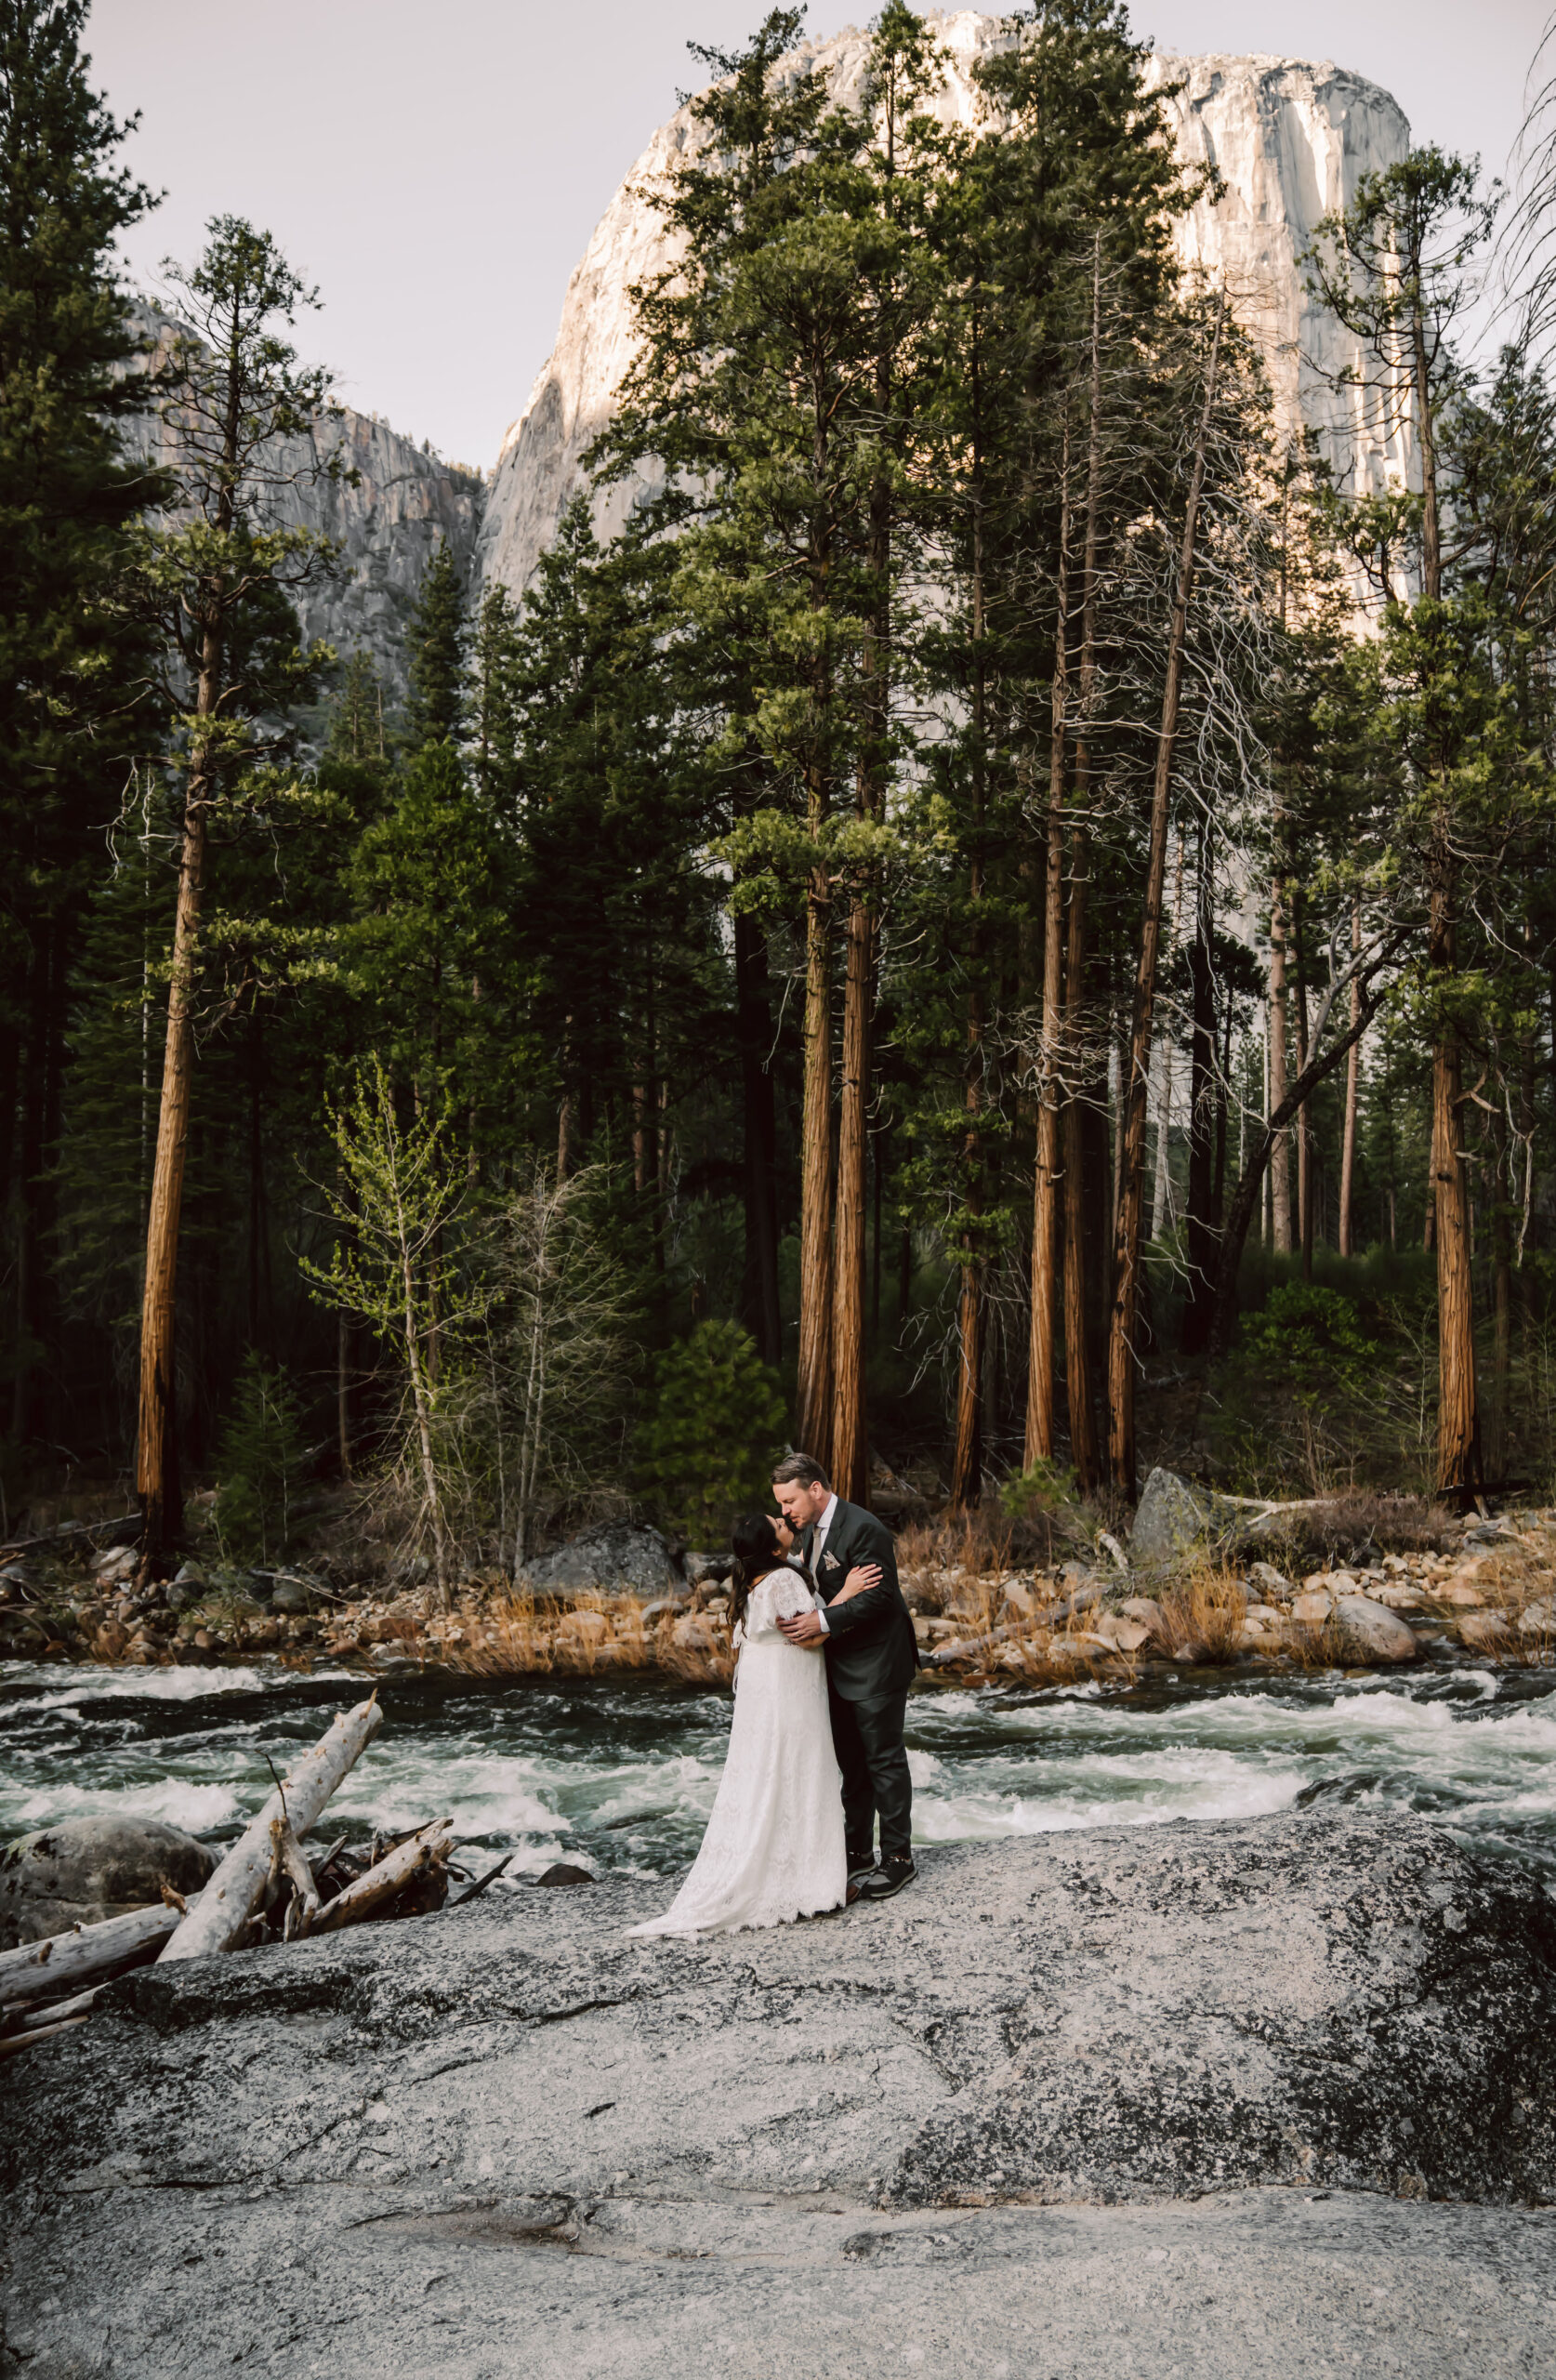 A elopement couple kissing next to the river and forest in the backdrop for their Yosemite Elopement